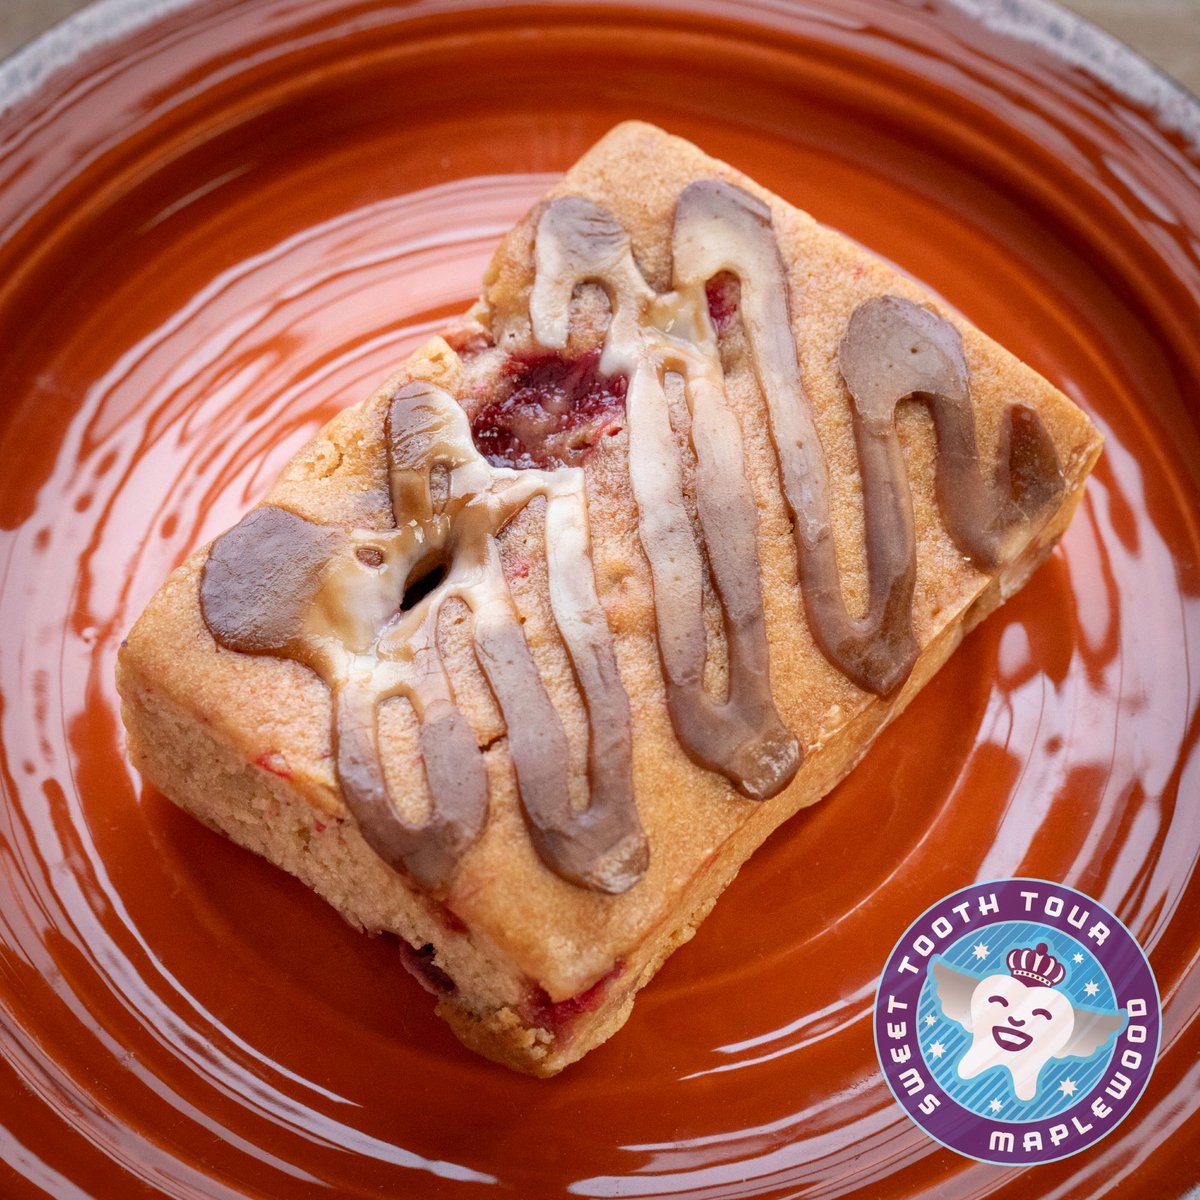 Hold the syrup! Great Harvest Bread Company's strawberry pancake blondie is delicious on its own. Sample this sweet treat at the Maplewood Sweet Tooth Tour on January 27th. Tickets are available at loom.ly/19hzwNU #EnjoyMaplewood #SupportLocal #MaplewoodSweetToothTour